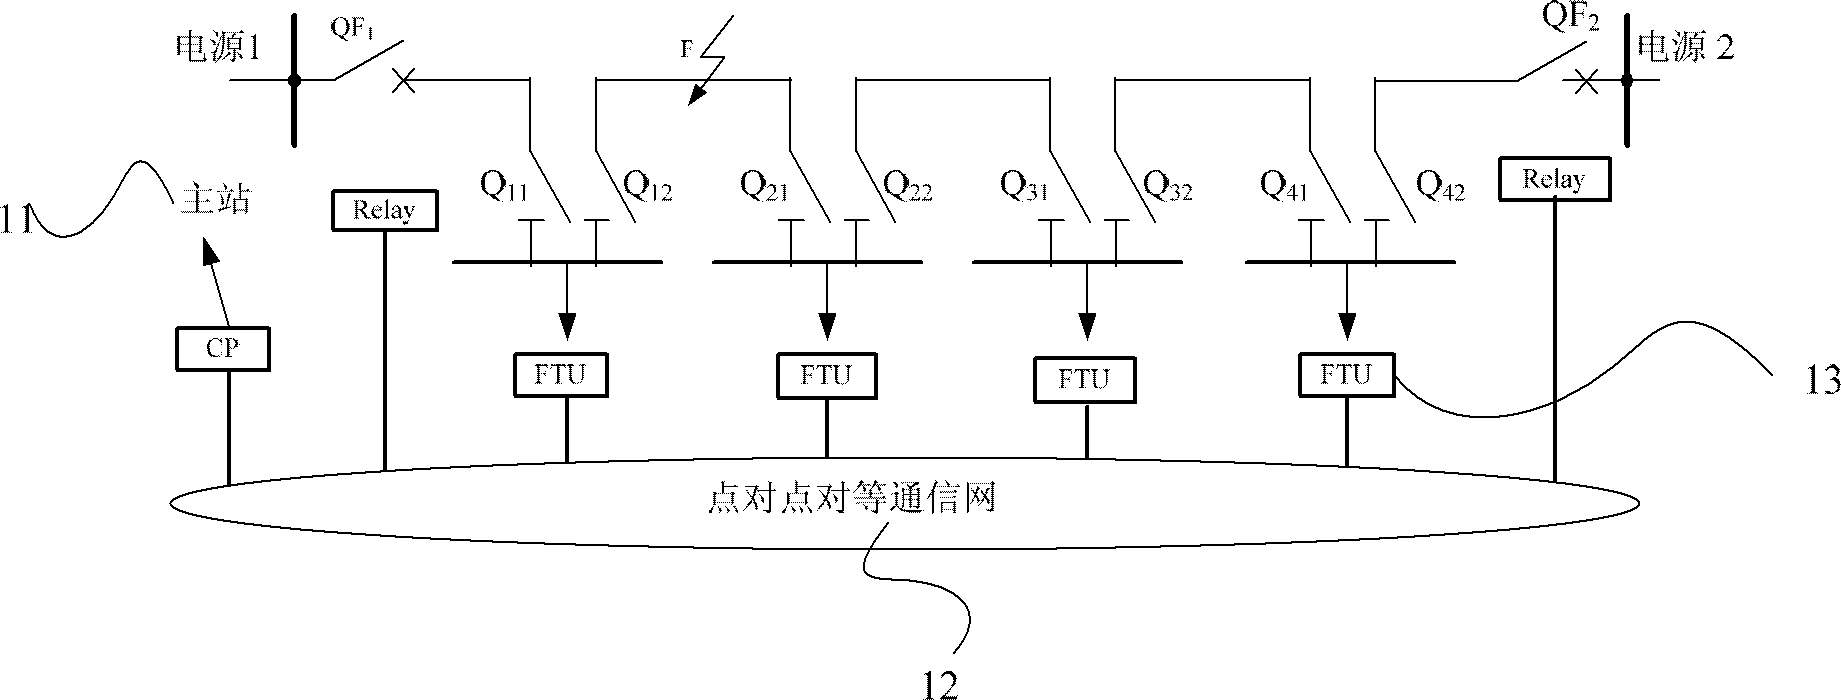 Small-current failure location system